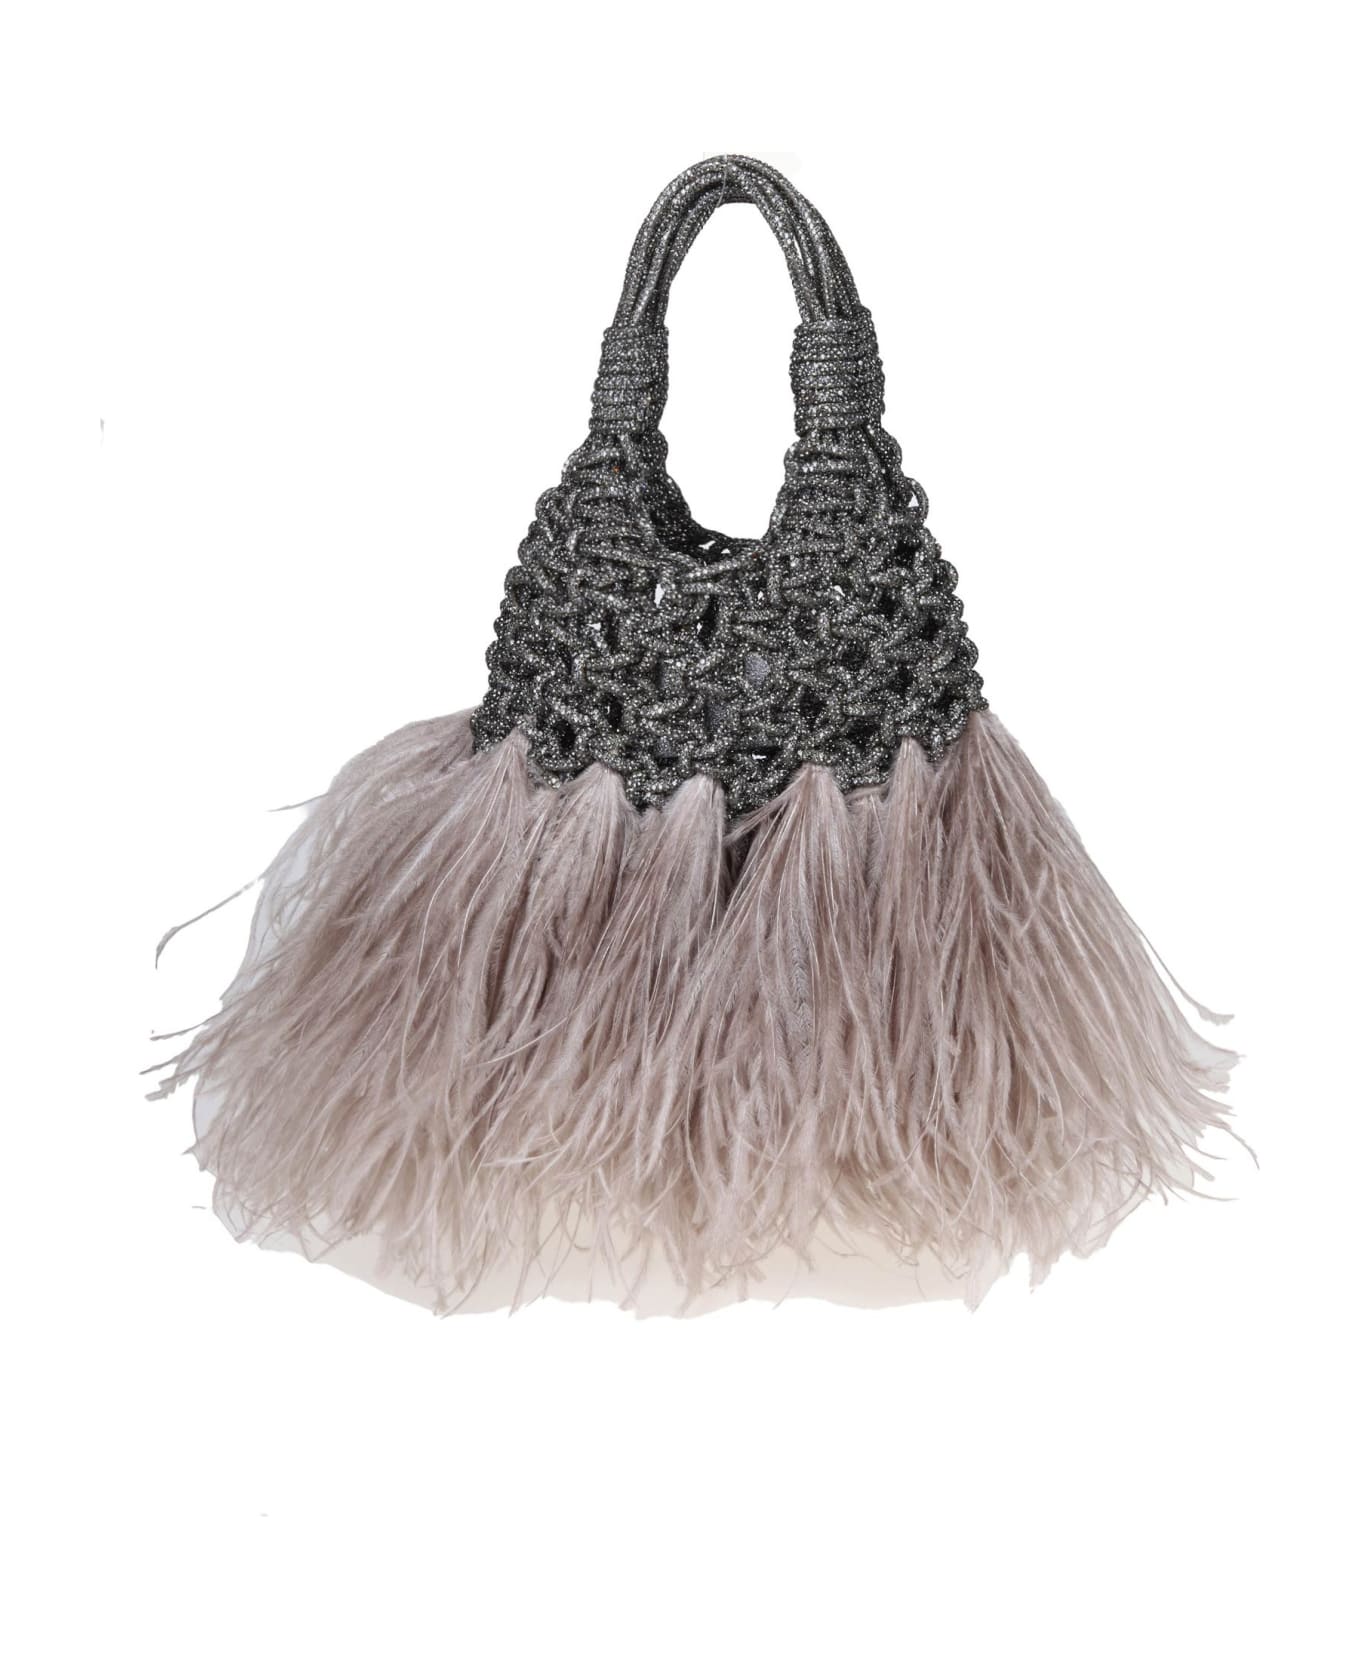 Hibourama Jewel Bag Woven With Ostrich Feathers - Black トートバッグ